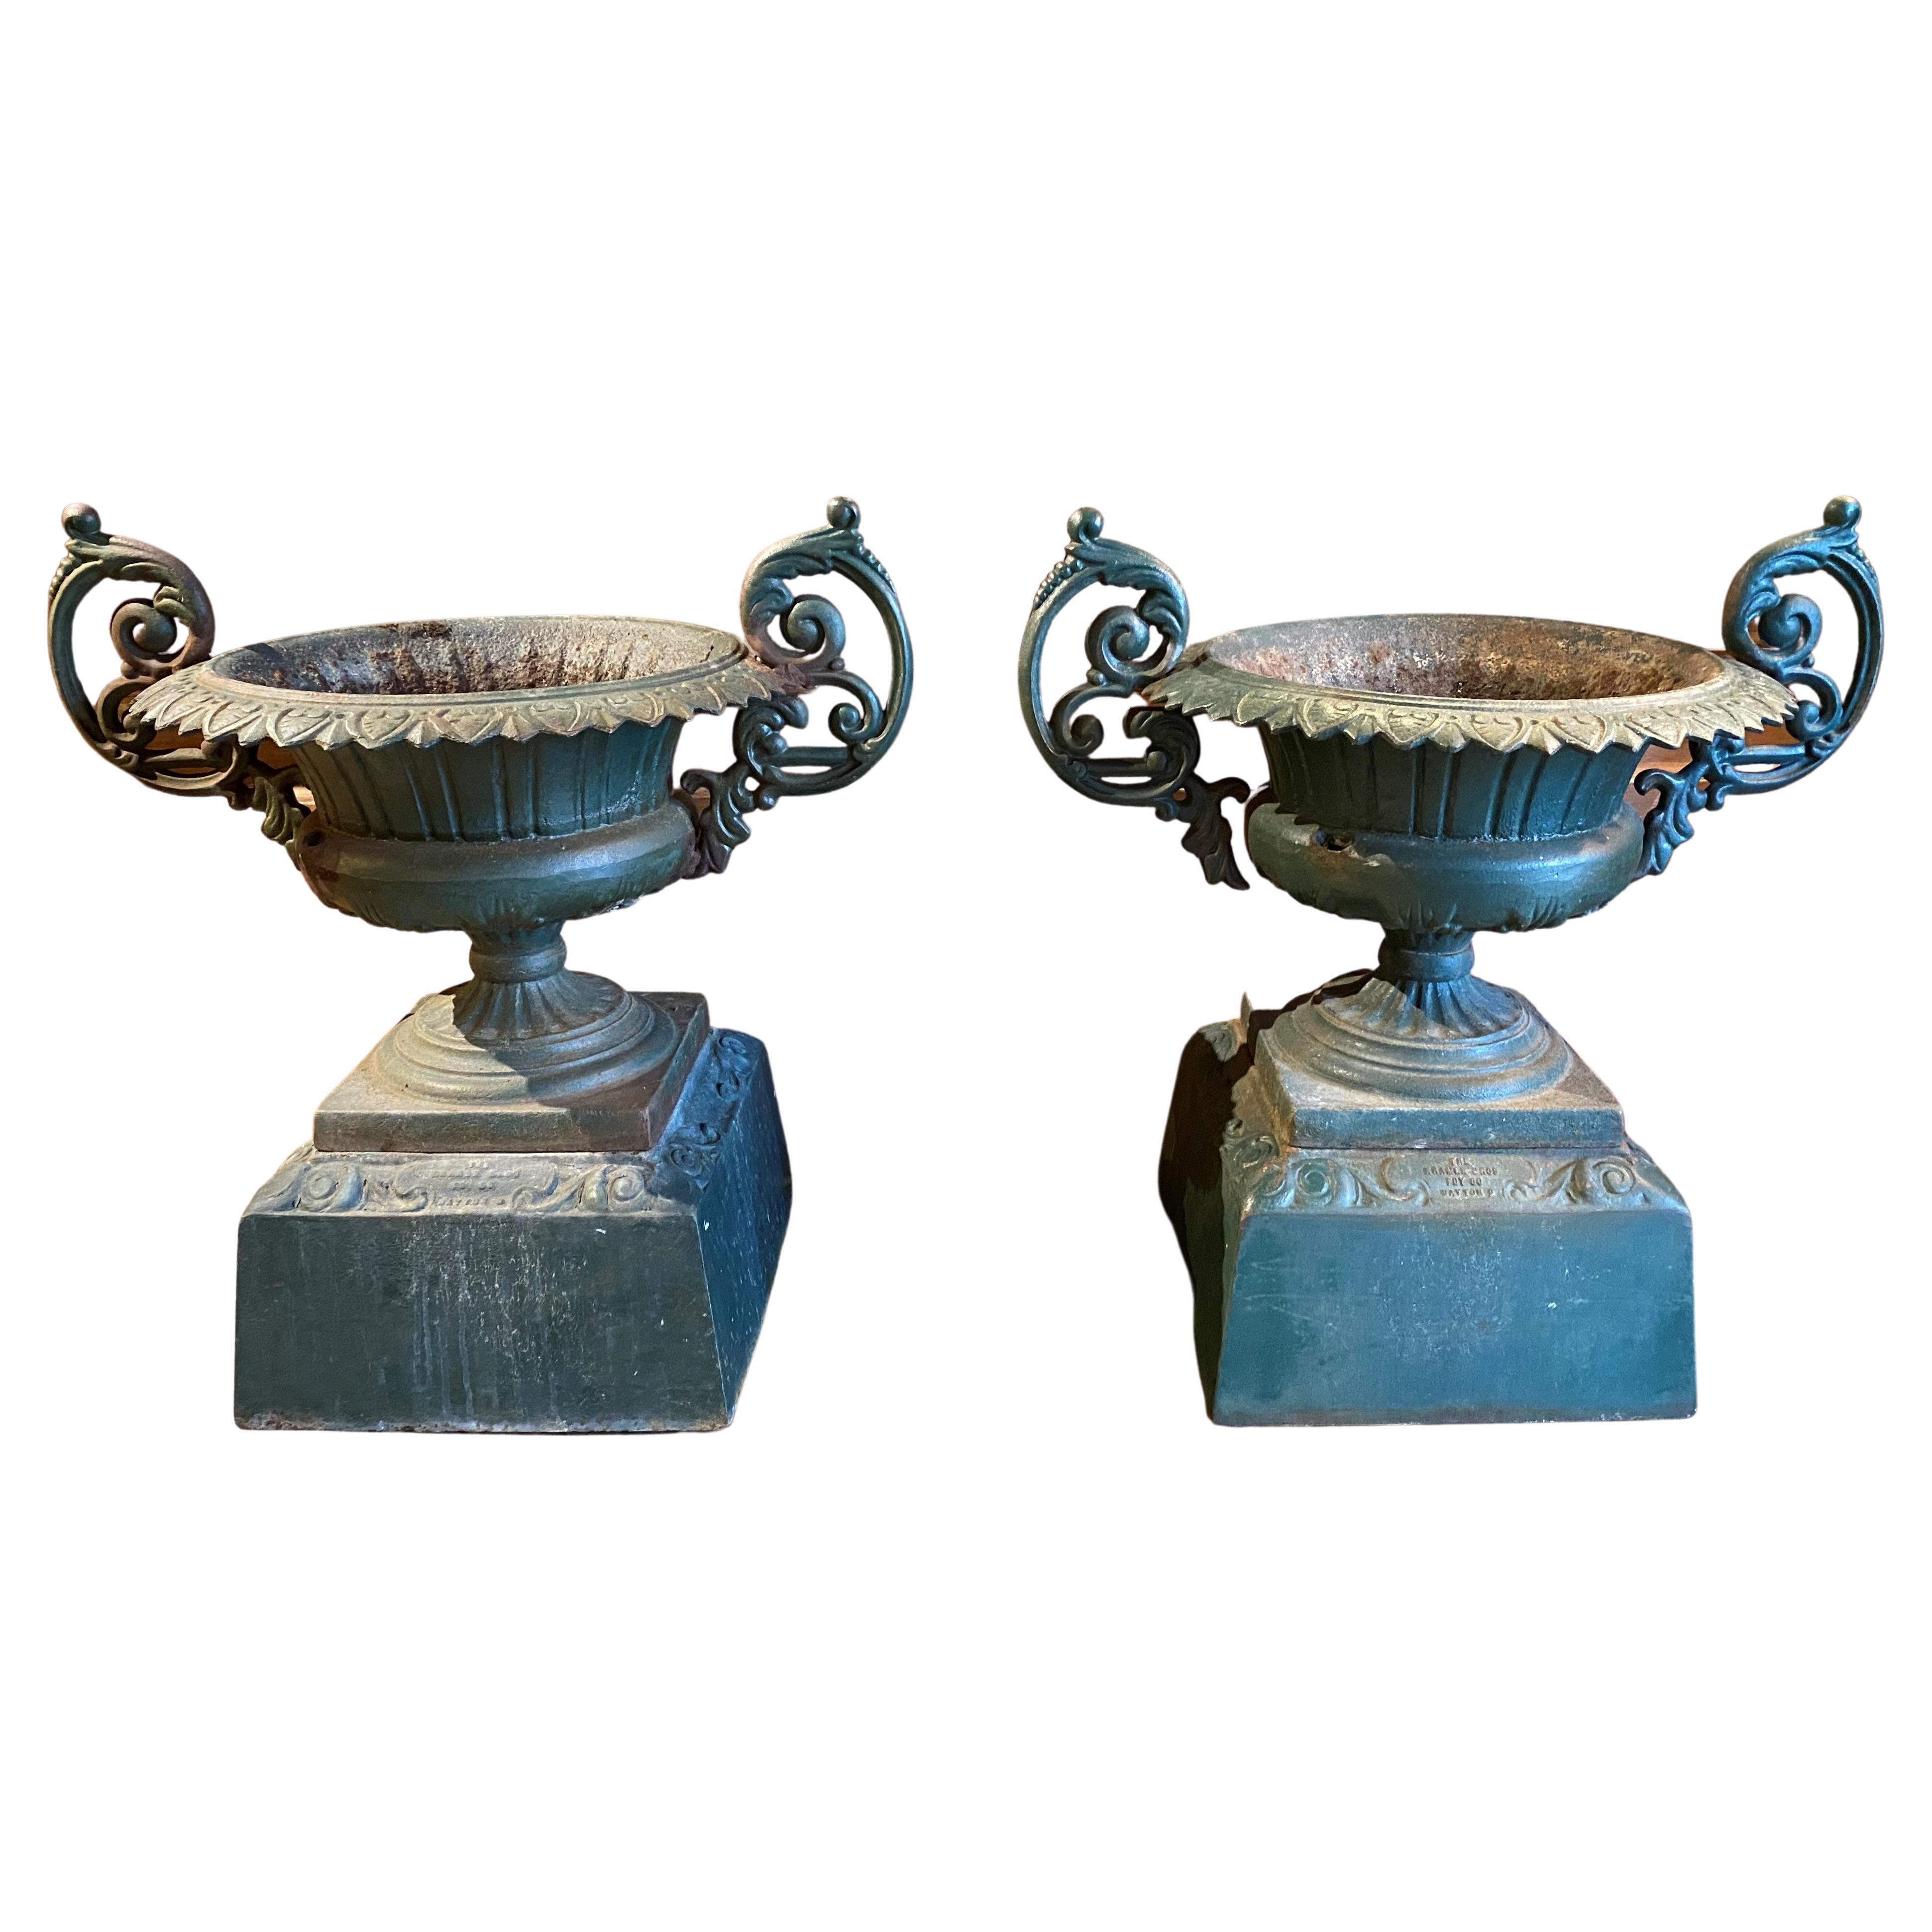 Pair of 19th Century Classical Form Cast Iron Urns by Kramer Bros Foundry